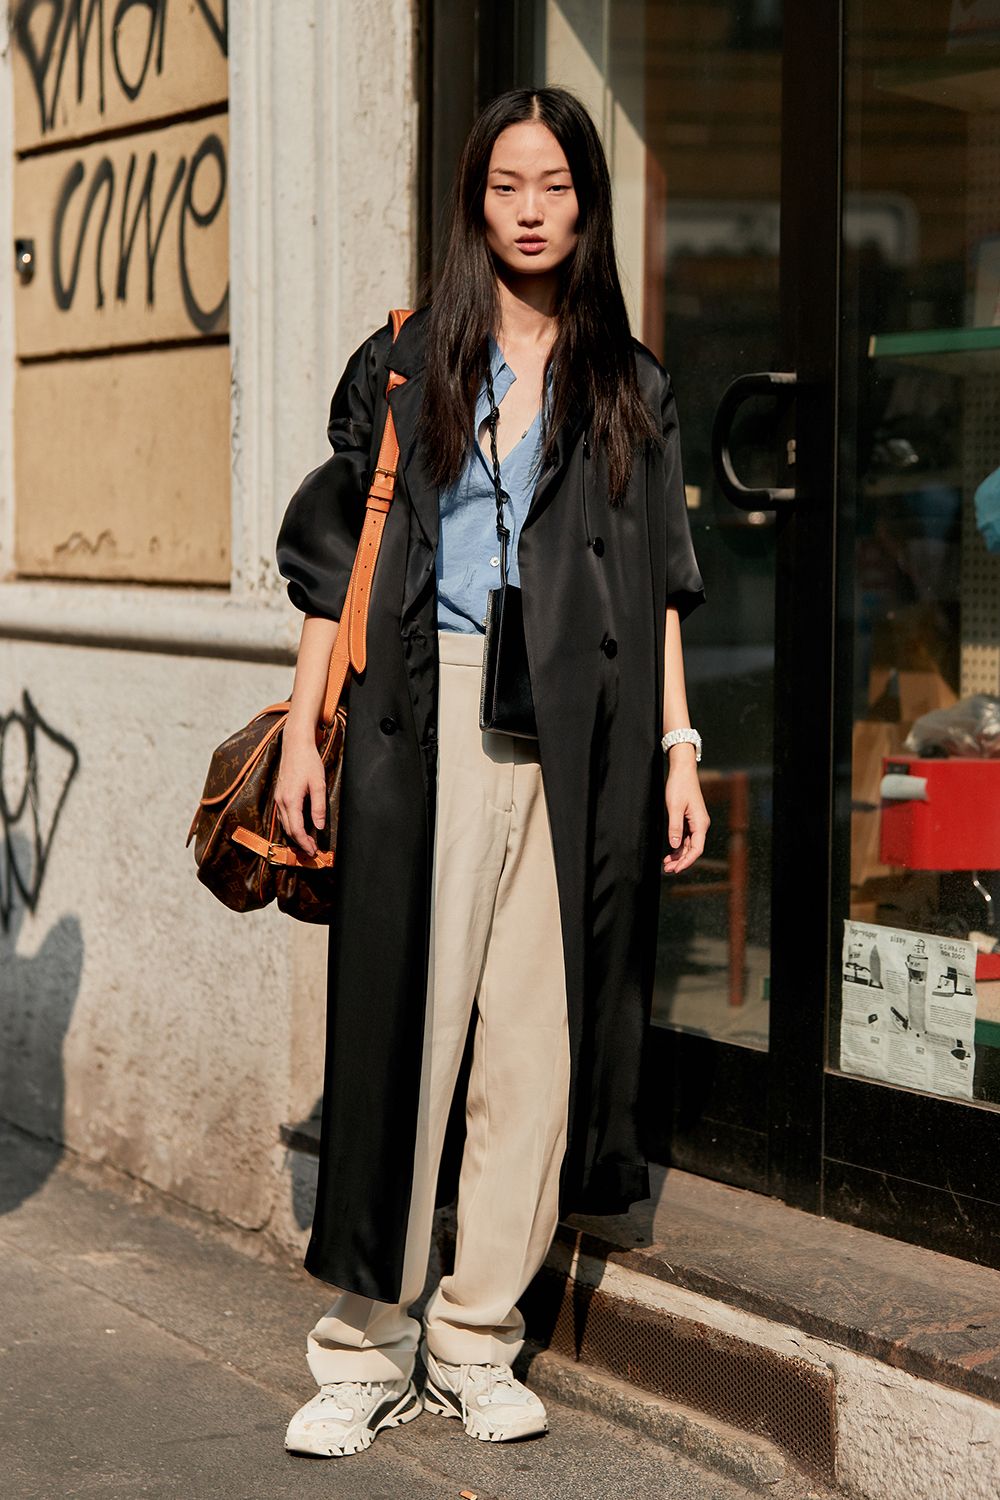 The Latest Street Style From Milan Fashion Week | Who What Wear